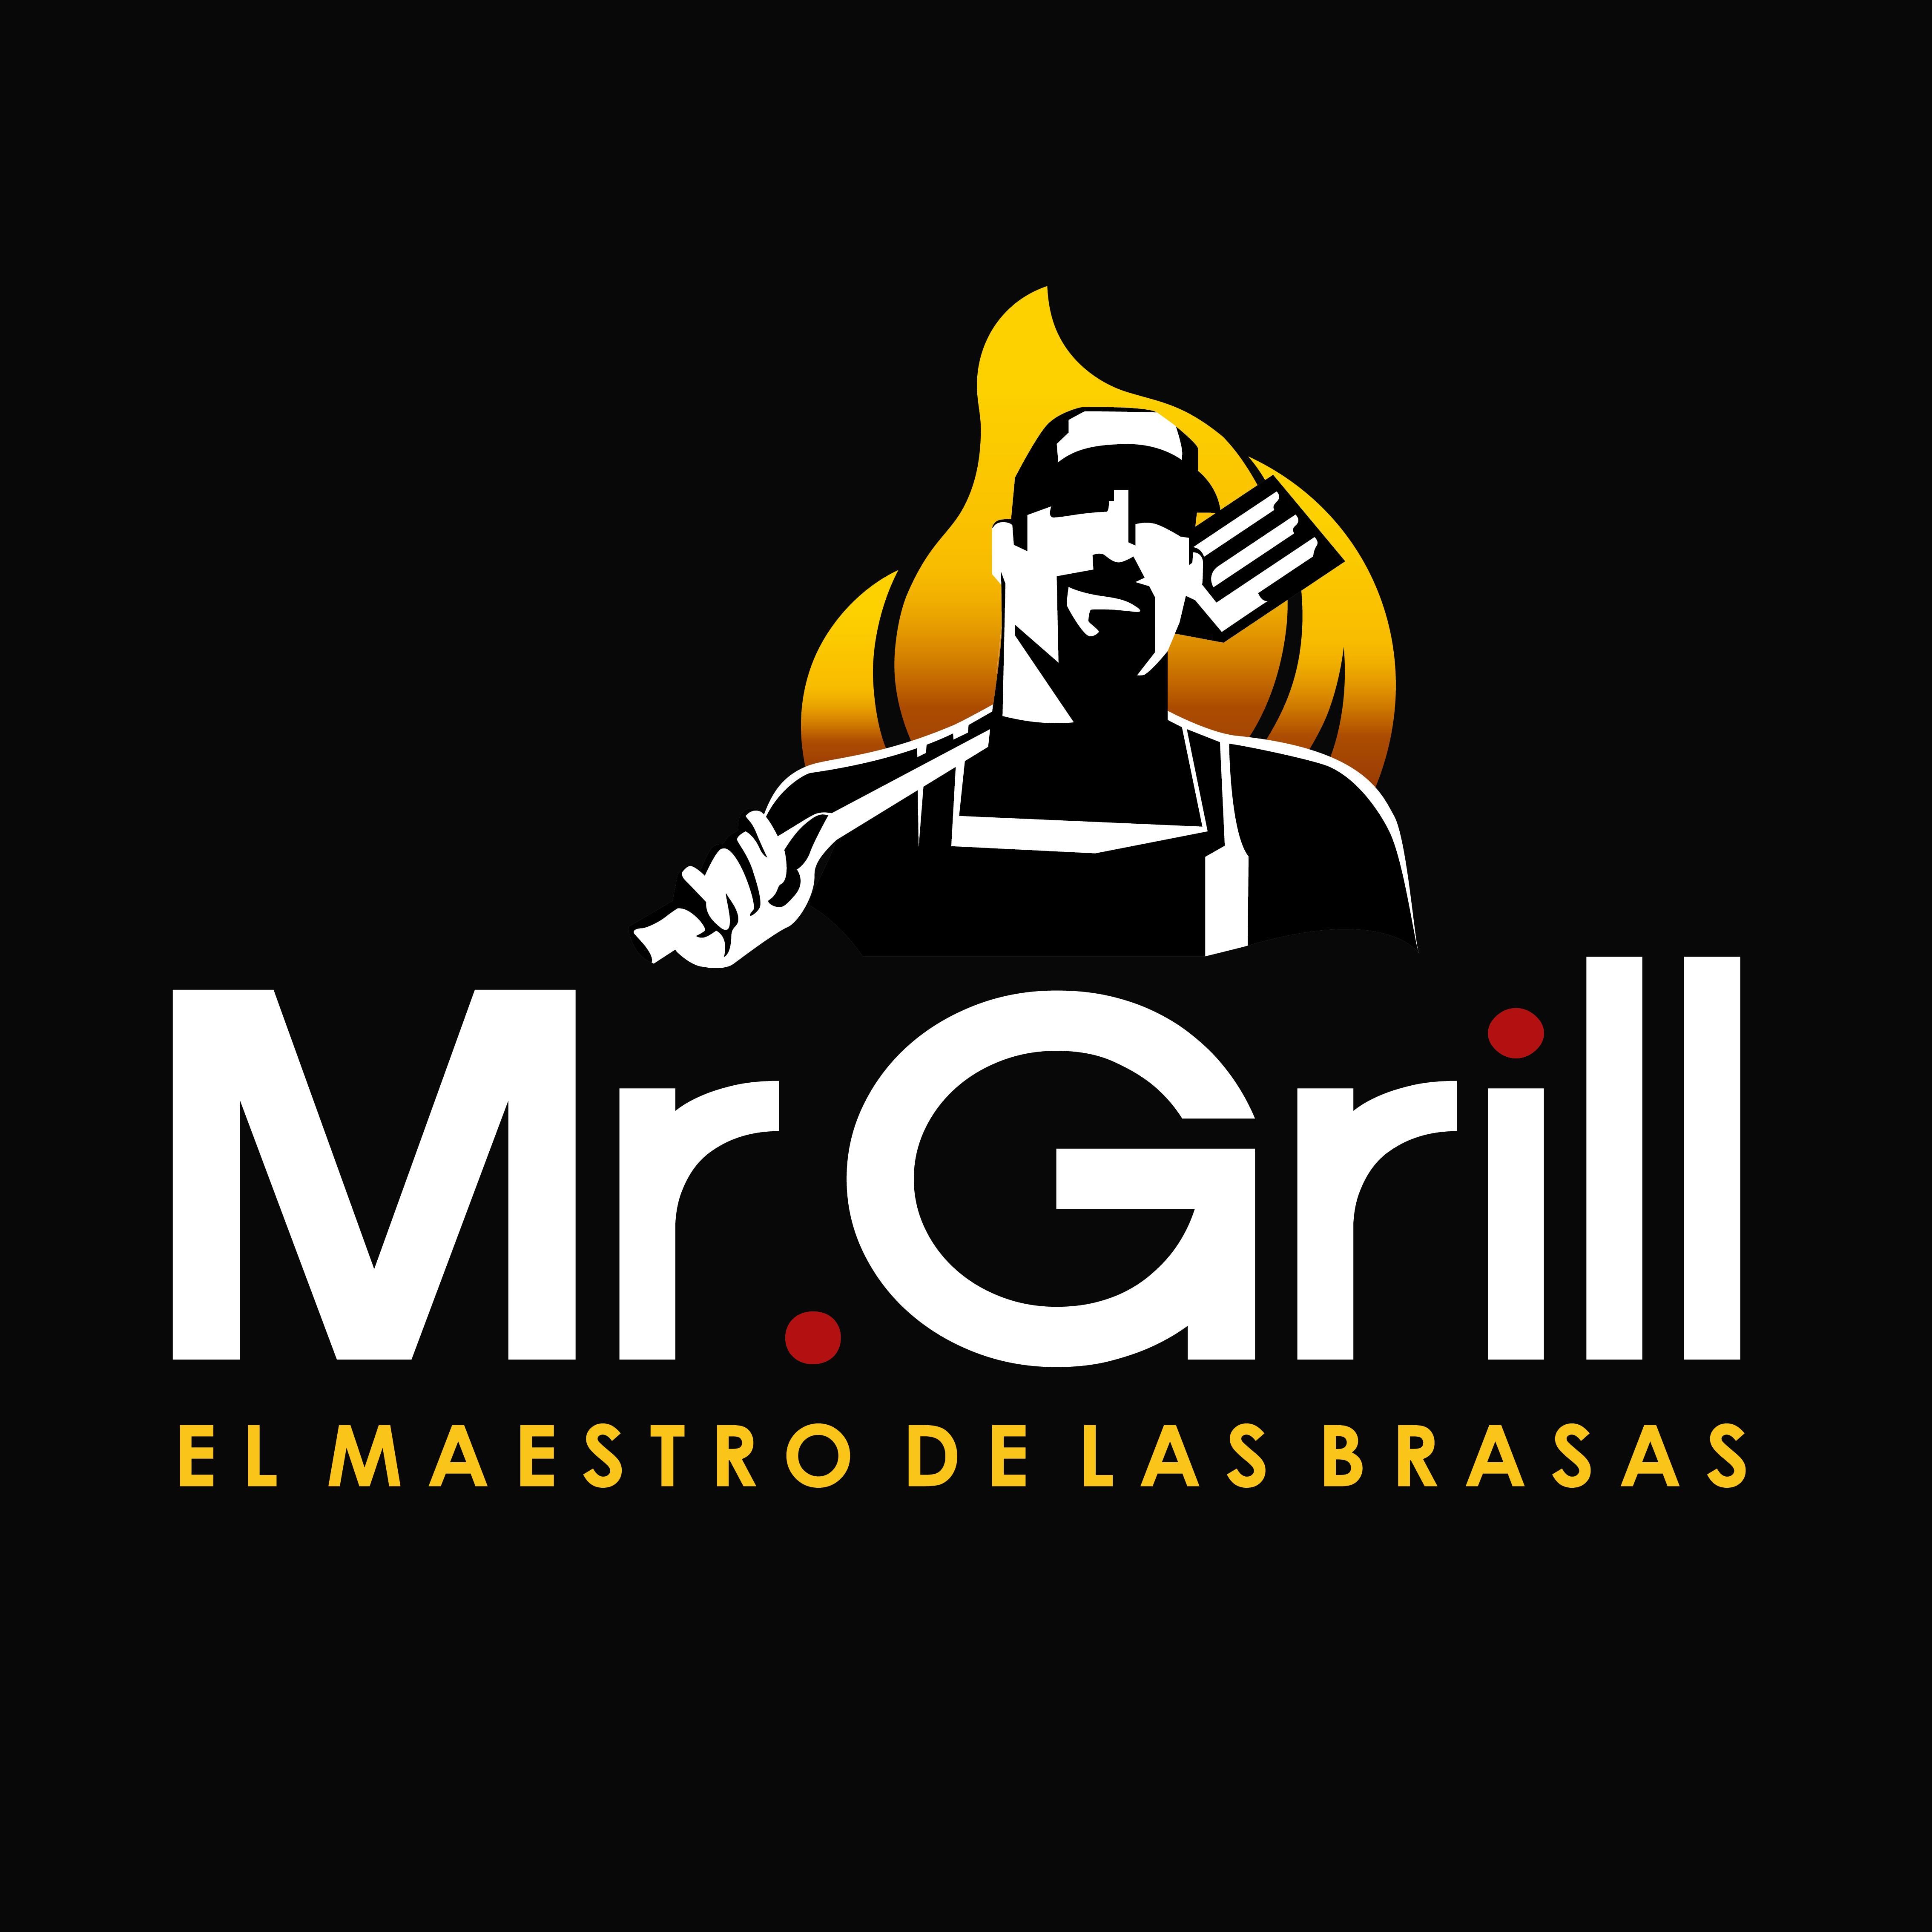 Grill Store